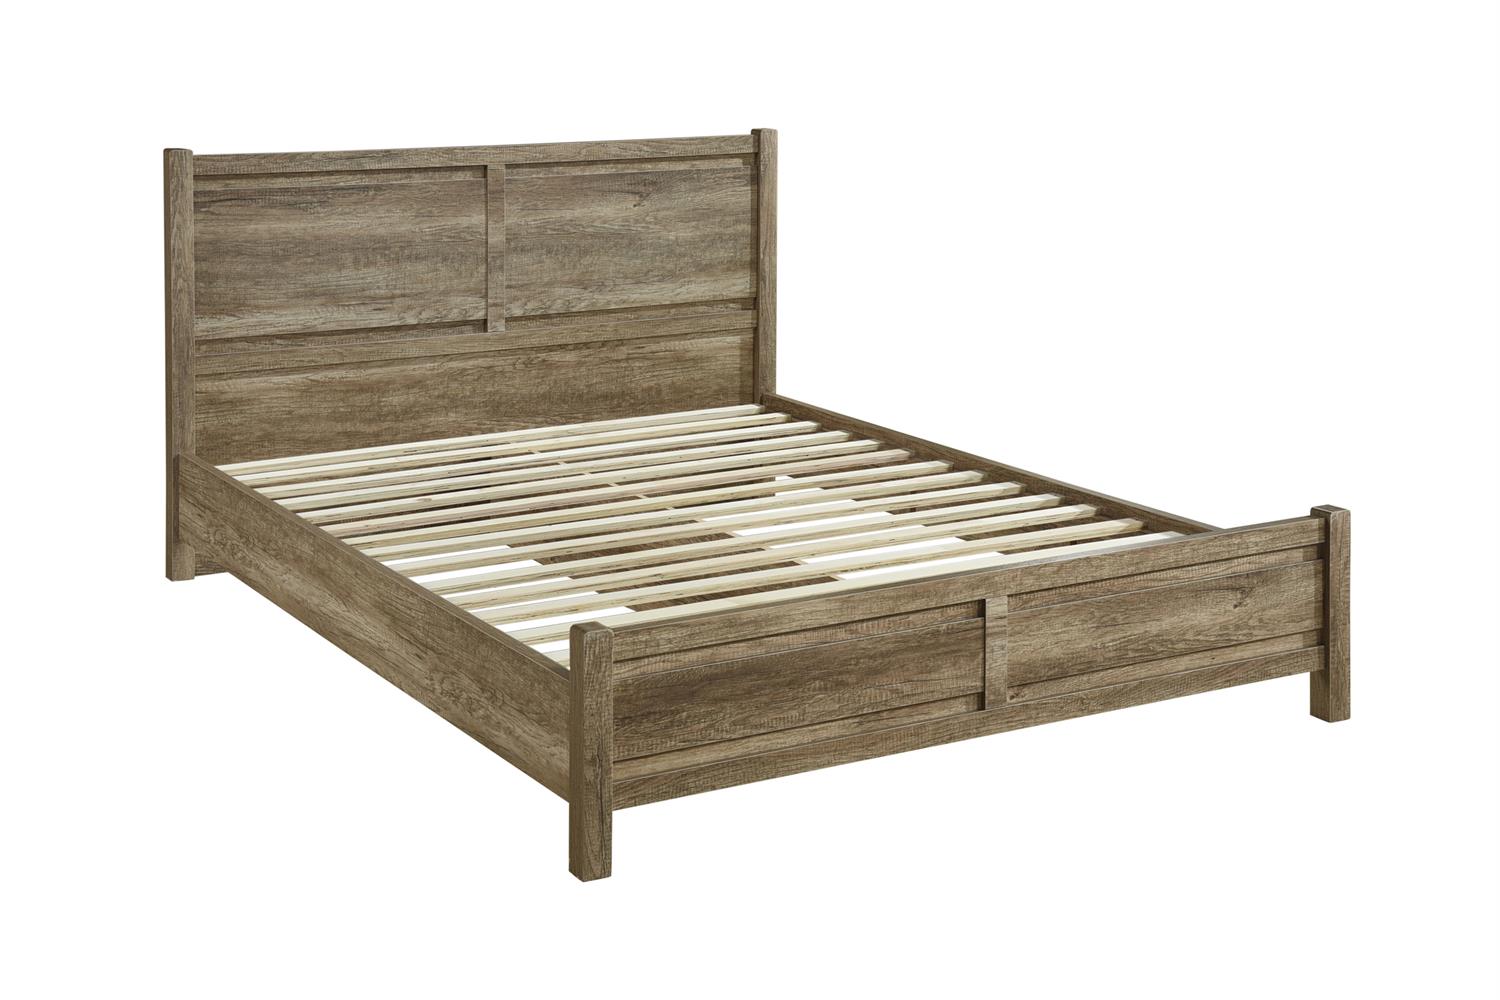 Queen Size Bed Frame Natural Wood like MDF in Oak Colour